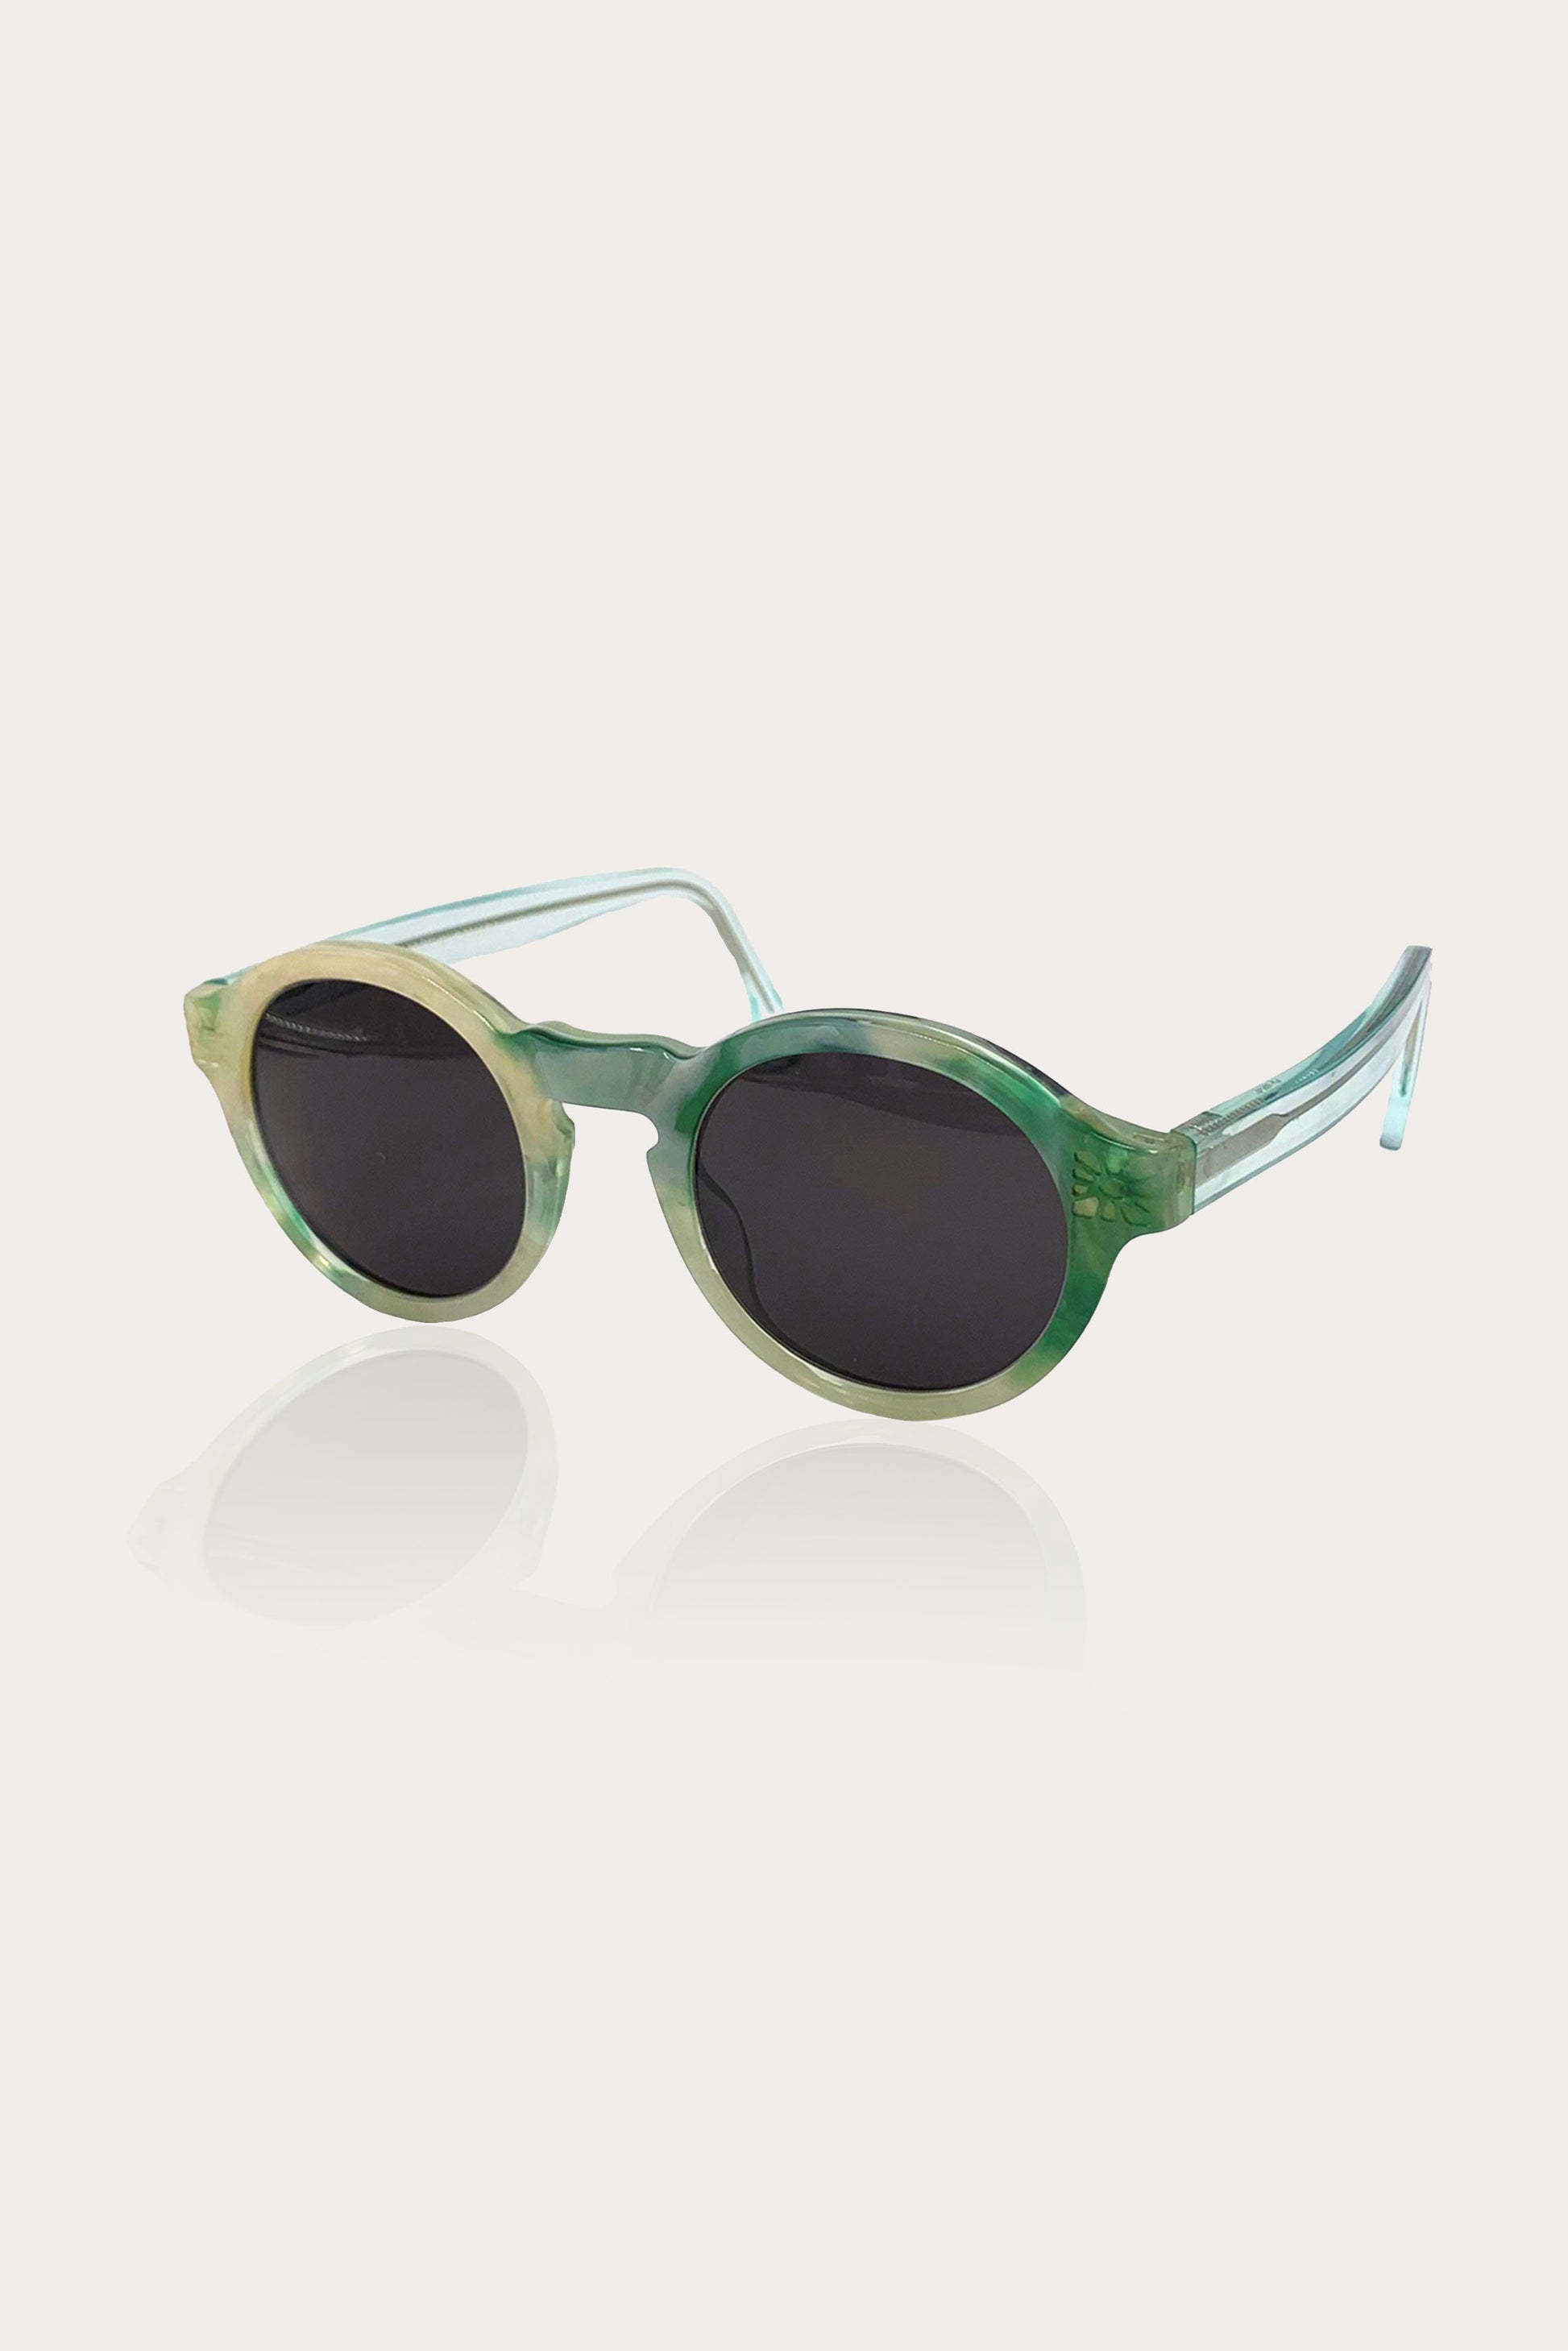  Round Sunglasses, large jade eyeglass frame with tinted lenses, made from Recycled Acetate